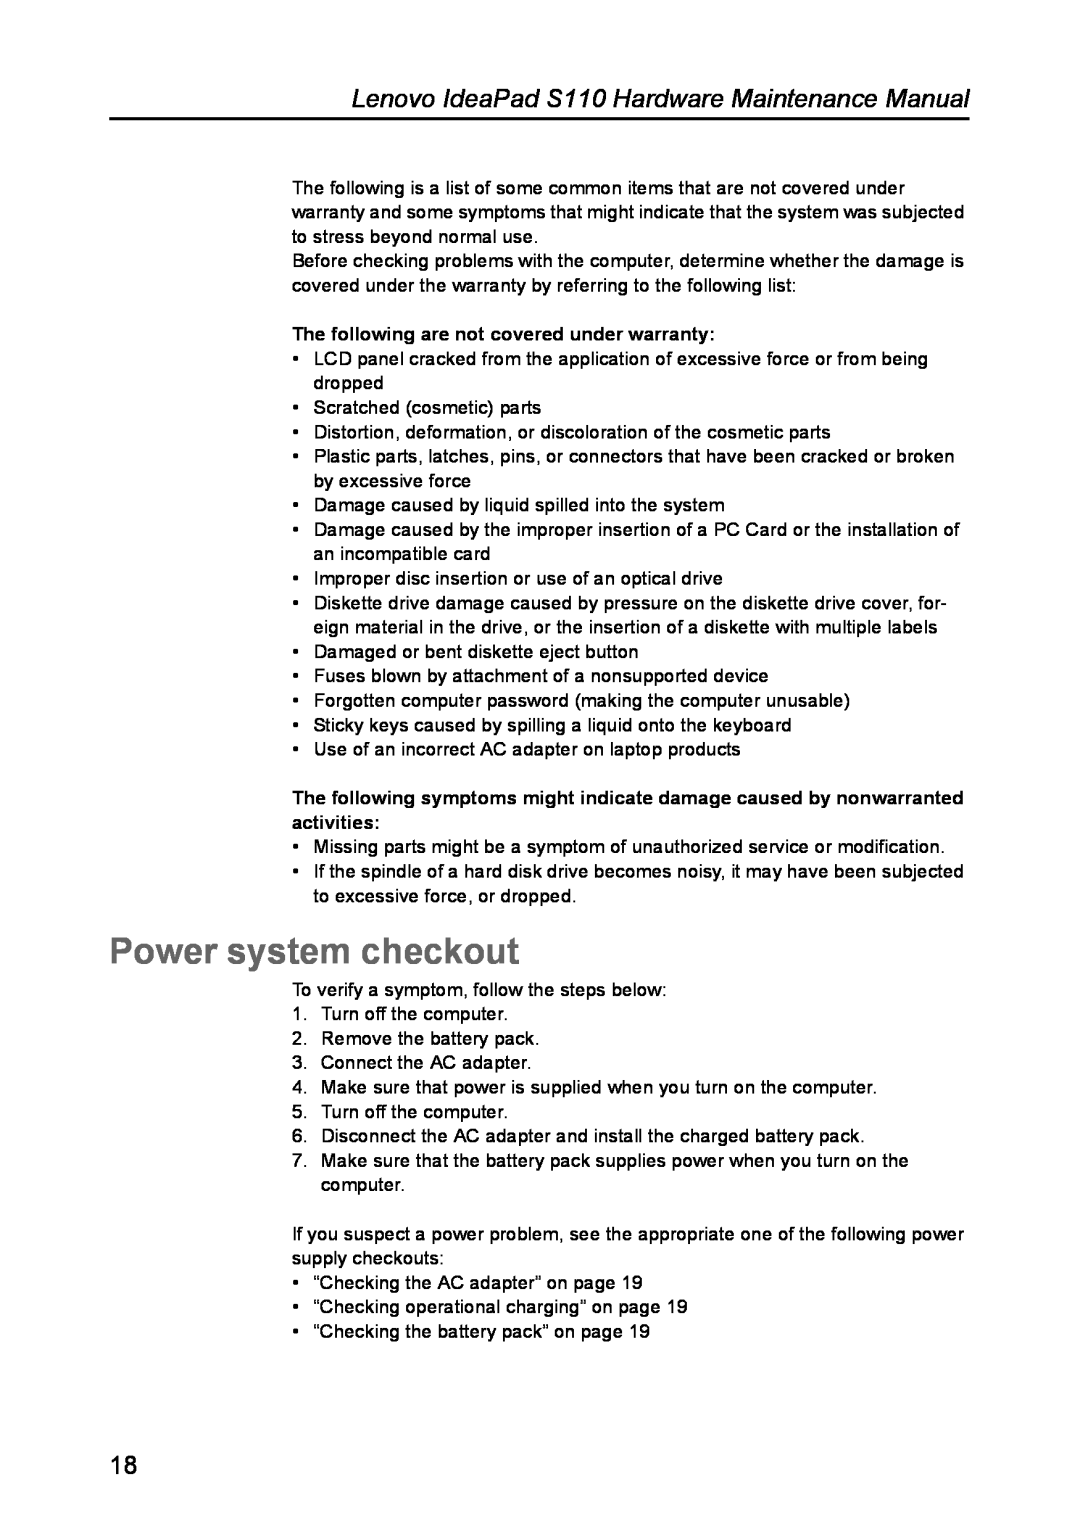 Lenovo S110 manual Power system checkout, The following are not covered under warranty 